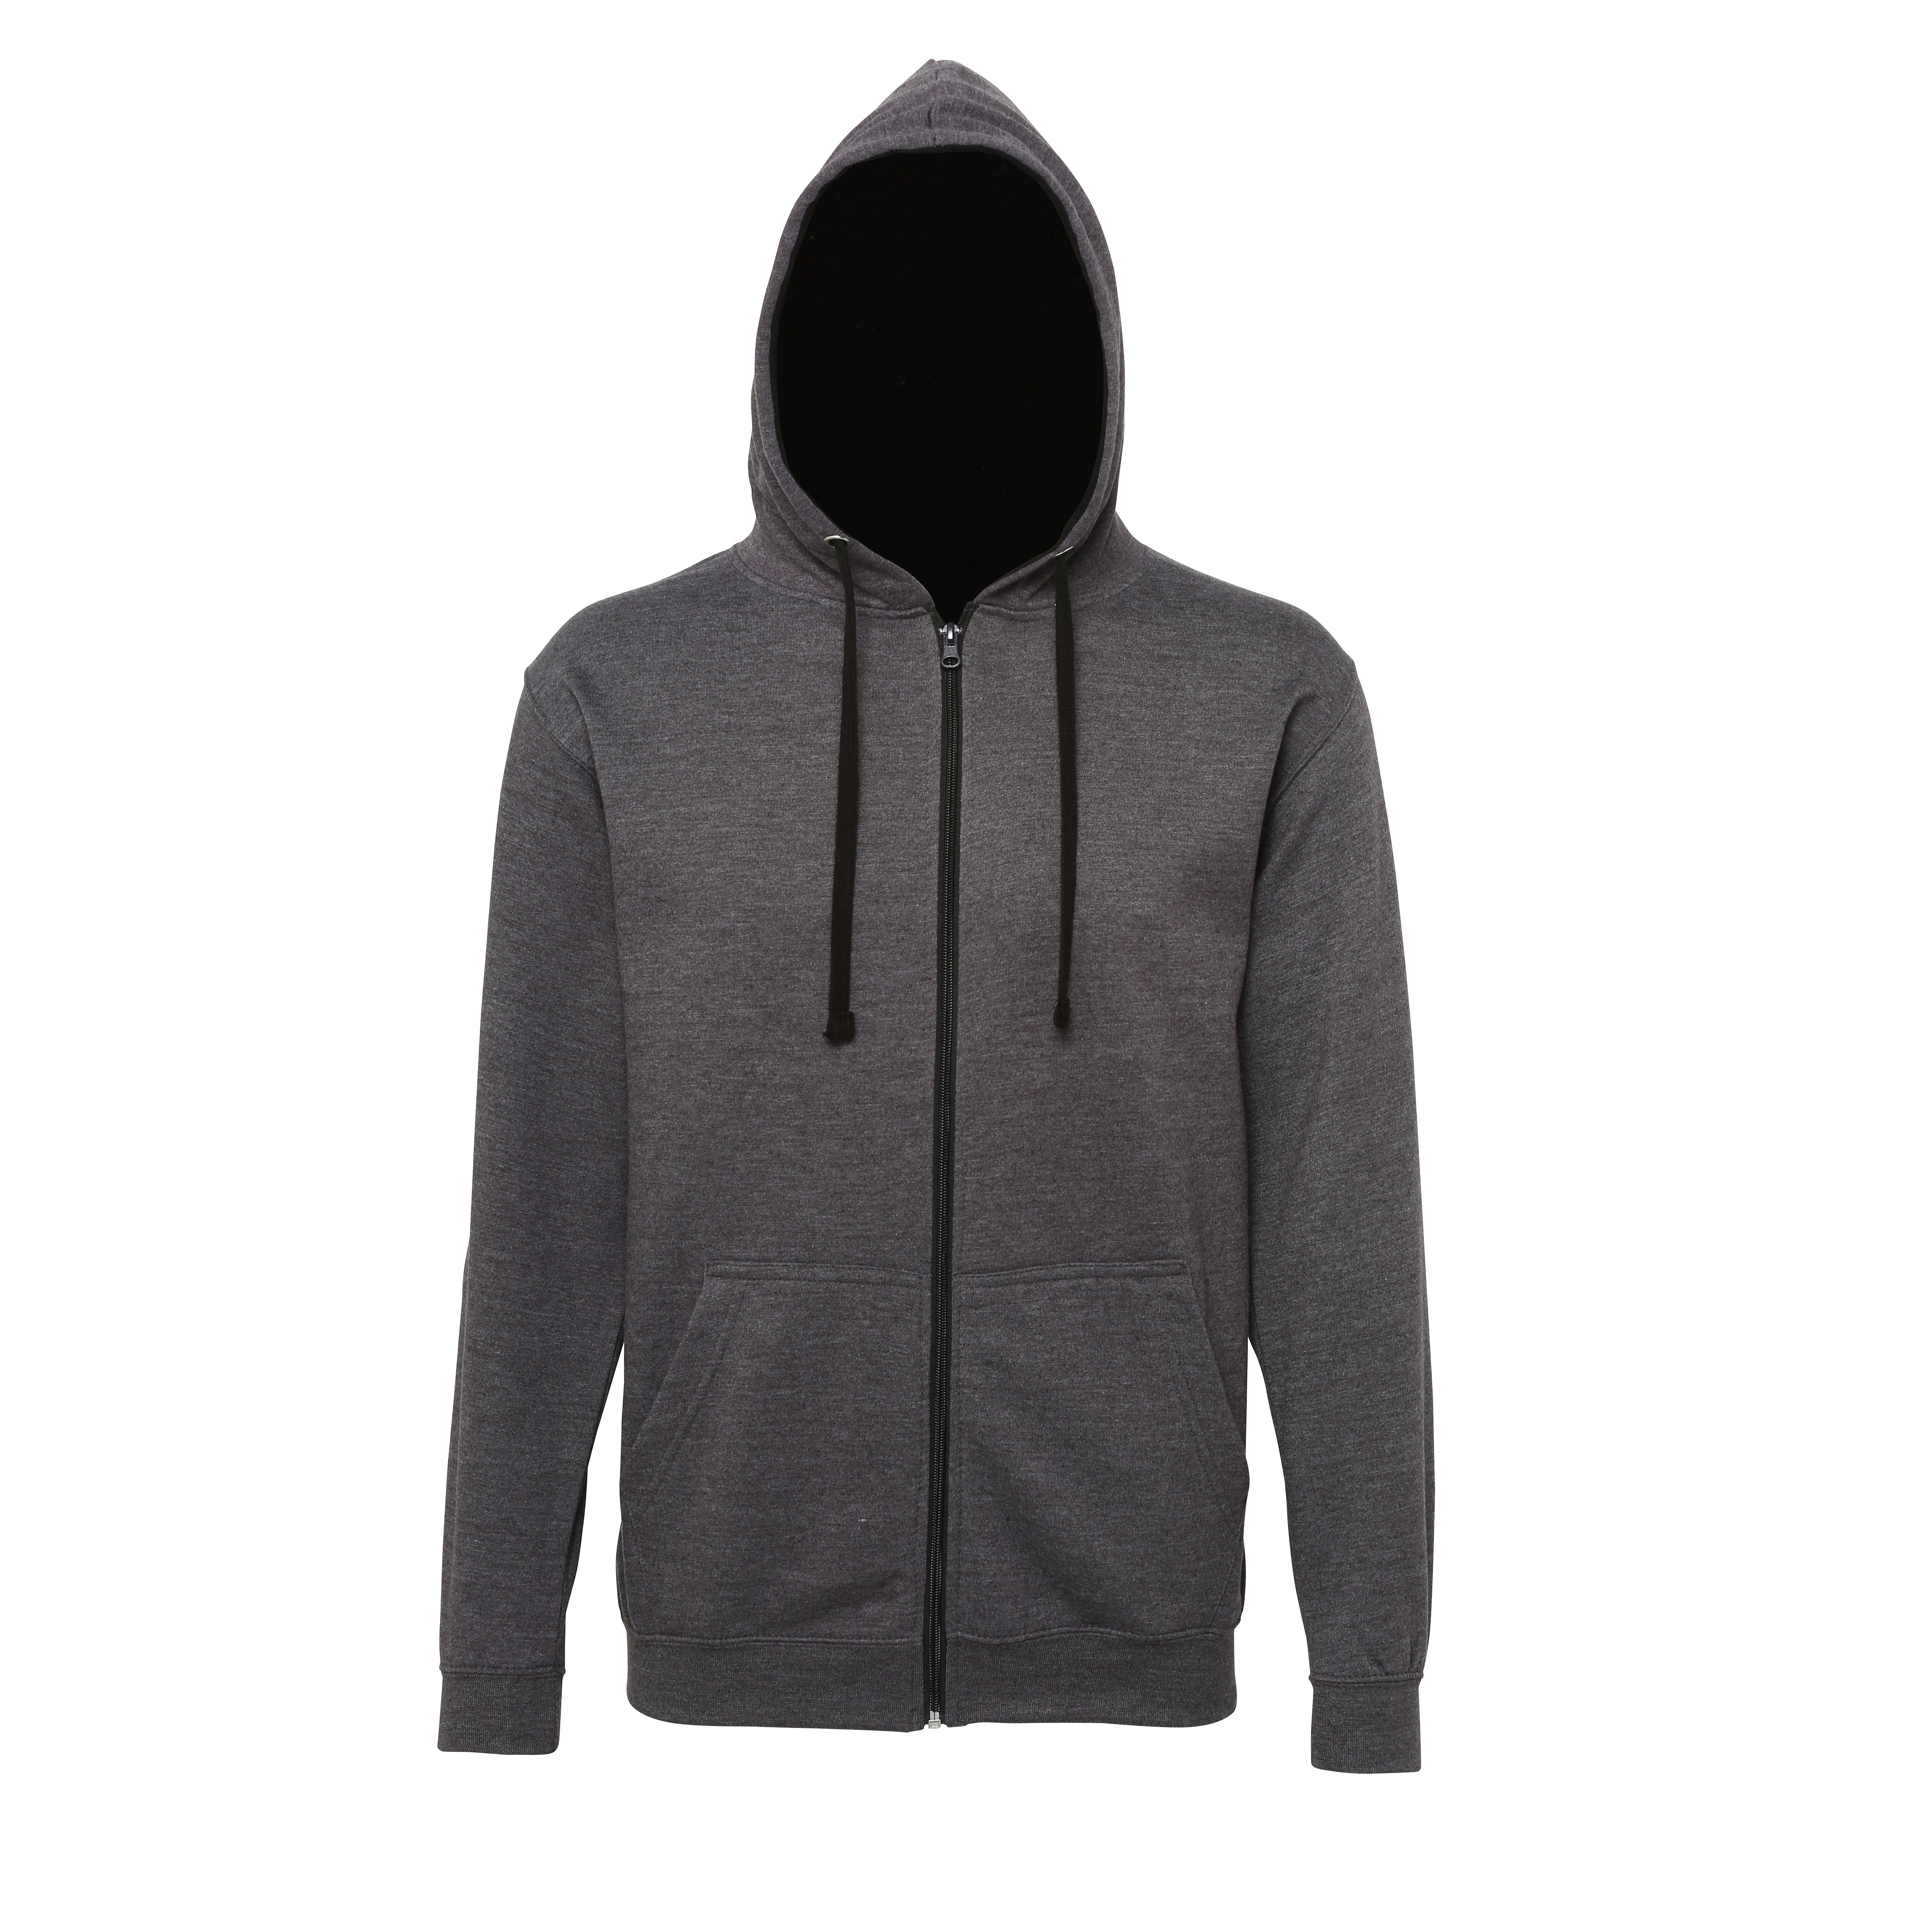 Men's Varsity Hoodie in charcoal with black details and lining